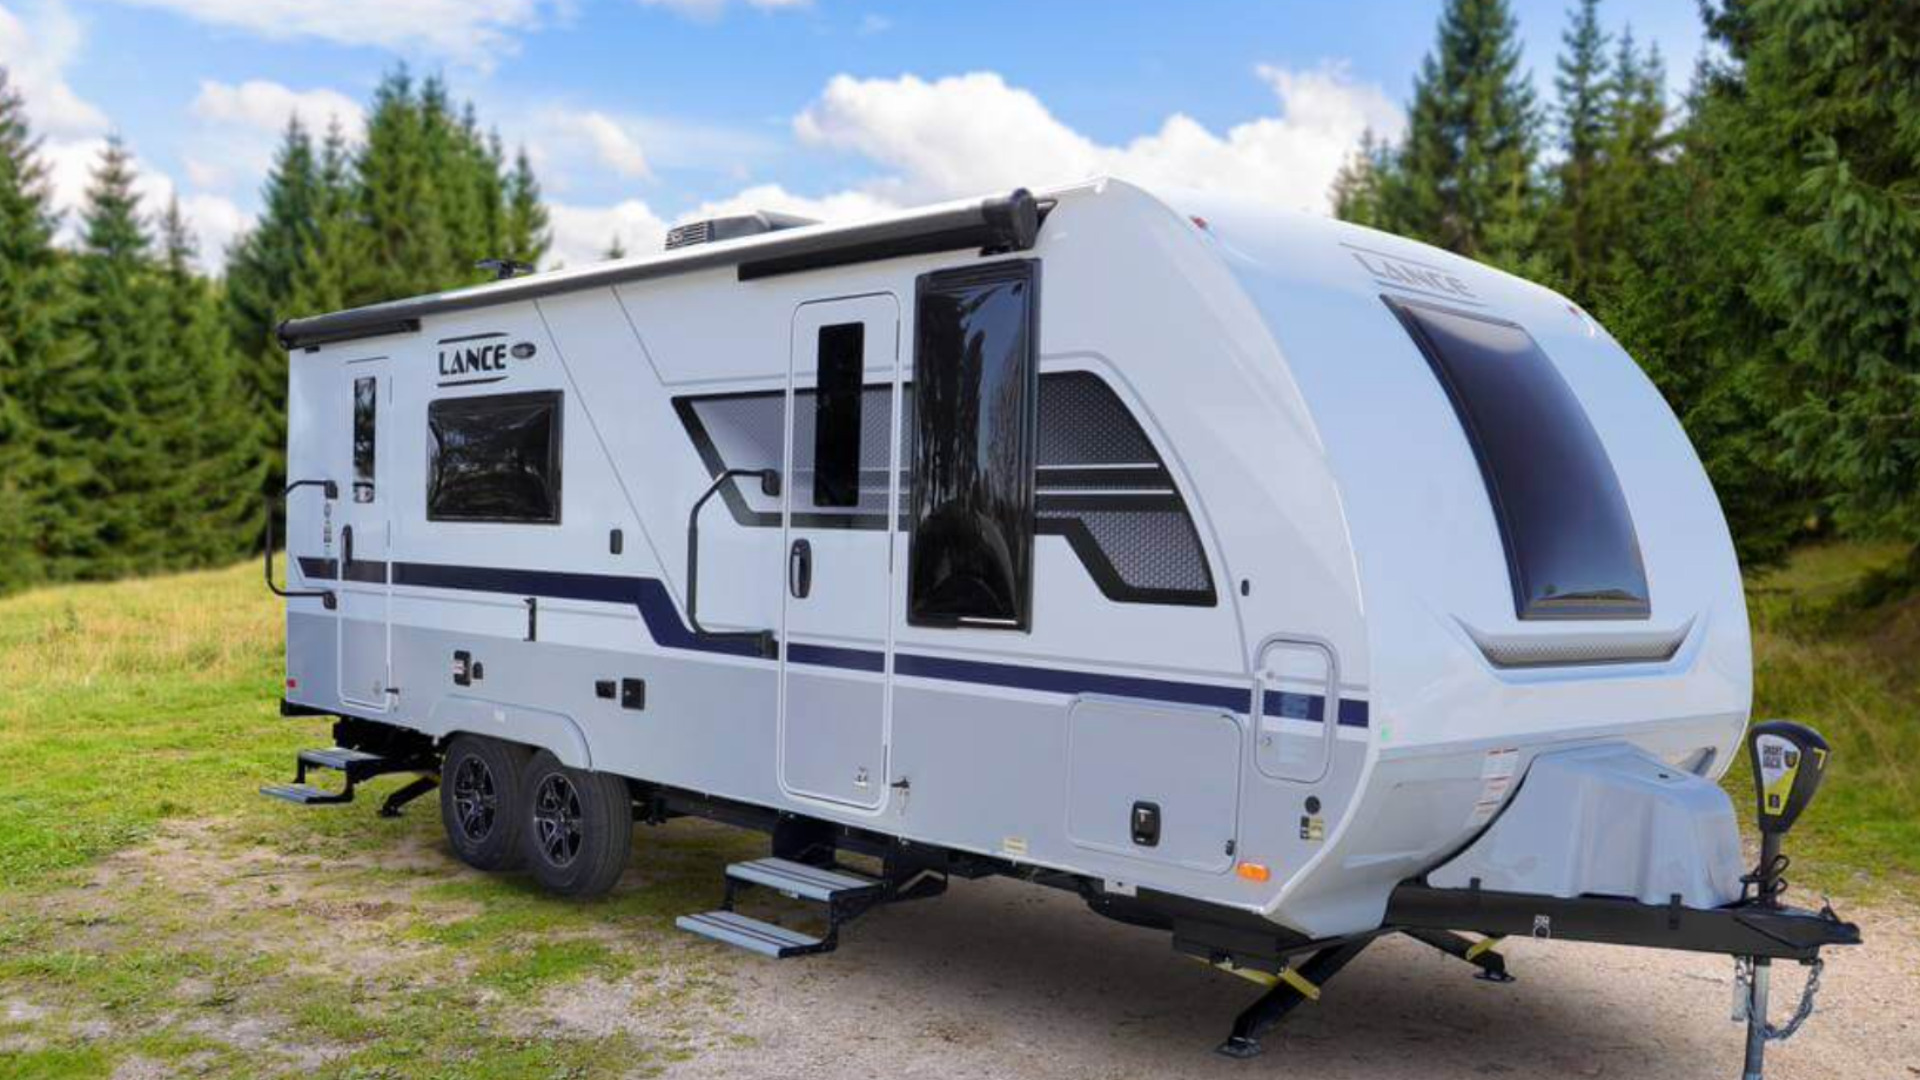 The Best Cold Weather Travel Trailers to Survive Winter